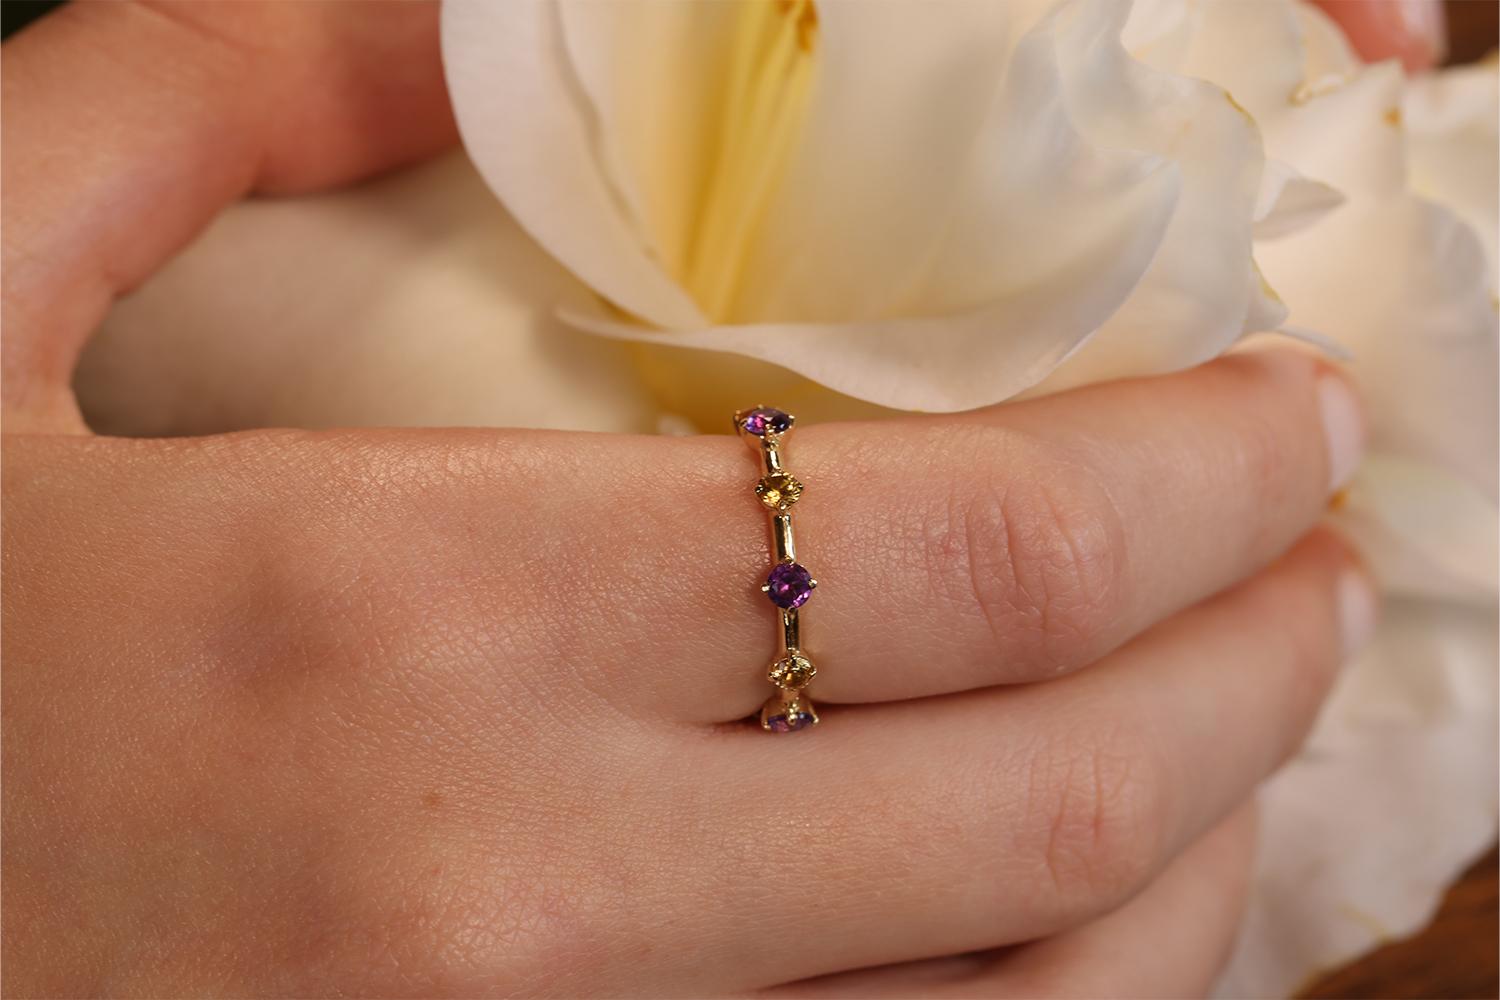 This is a beautifully made custom ring that is one of a kind, it is literally 1 of 1. The ring features 5 yellow sapphire stones and 5 purple amethyst stones and the two colors are very complimentary. Made by T Makowski Company in North America the